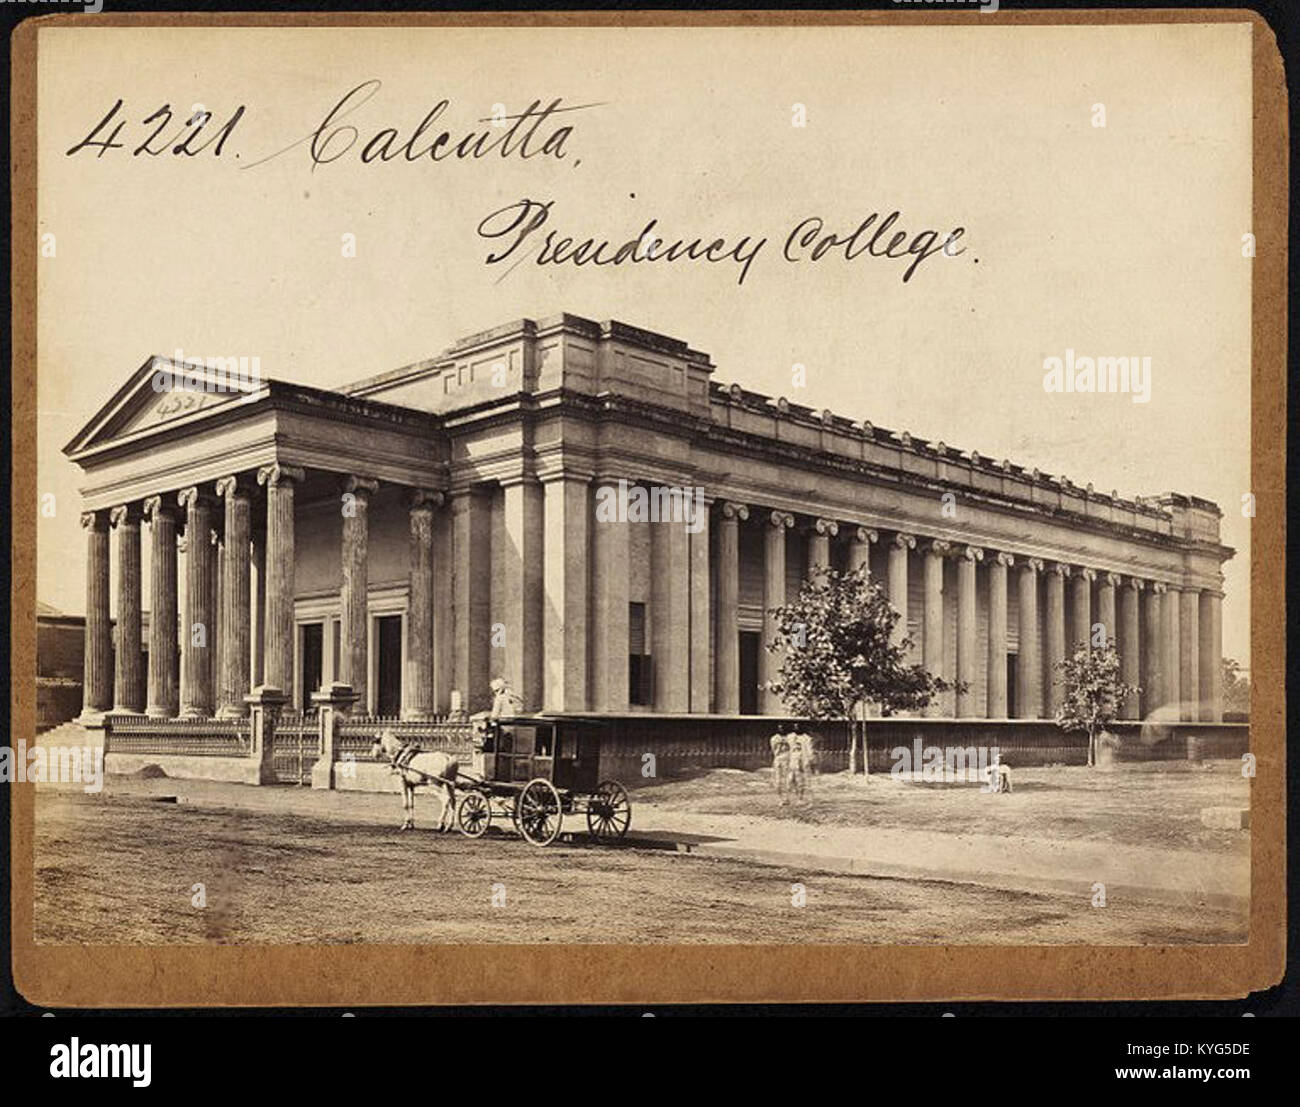 Presidency College, Calcutta by Francis Frith (2) Stock Photo